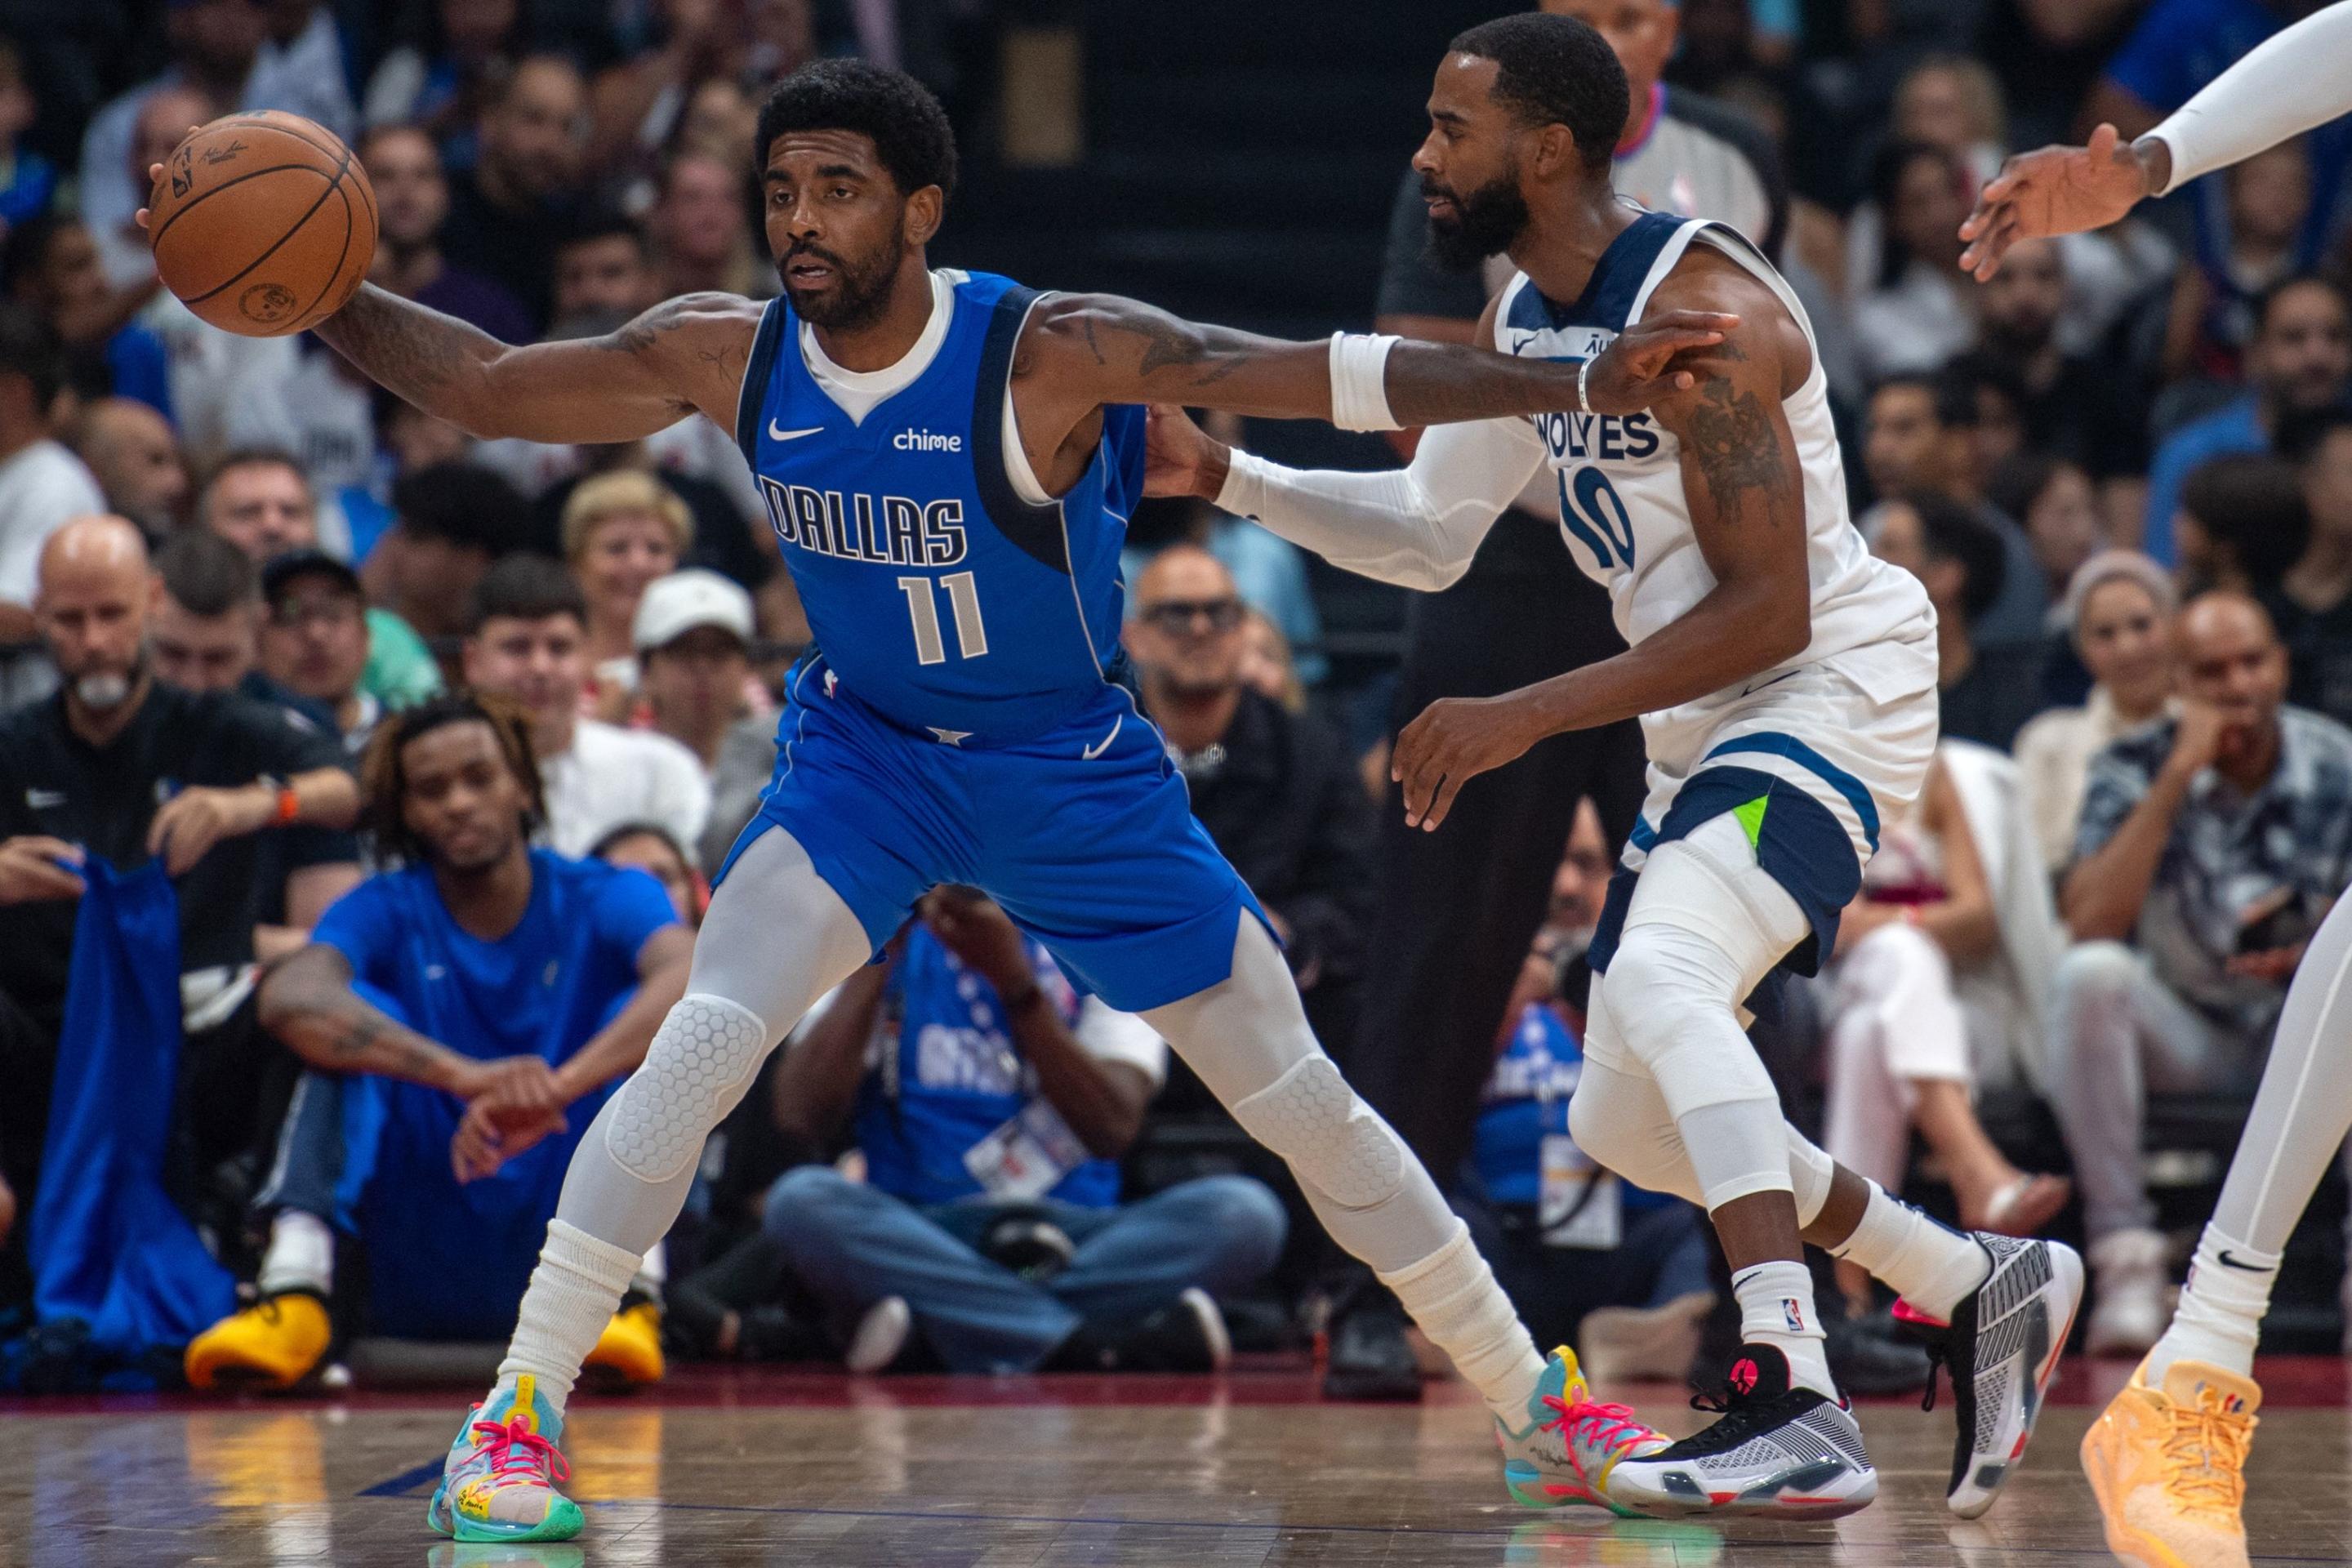 Dallas Mavericks guard Kyrie Irving is guarded by Minnesota Timberwolves guard Mike Conley during an NBA preseason game at the Etihad Arena in Abu Dhabi, United Arab Emirates, on Oct. 5, 2023. (Photo by Ryan LIM / AFP)